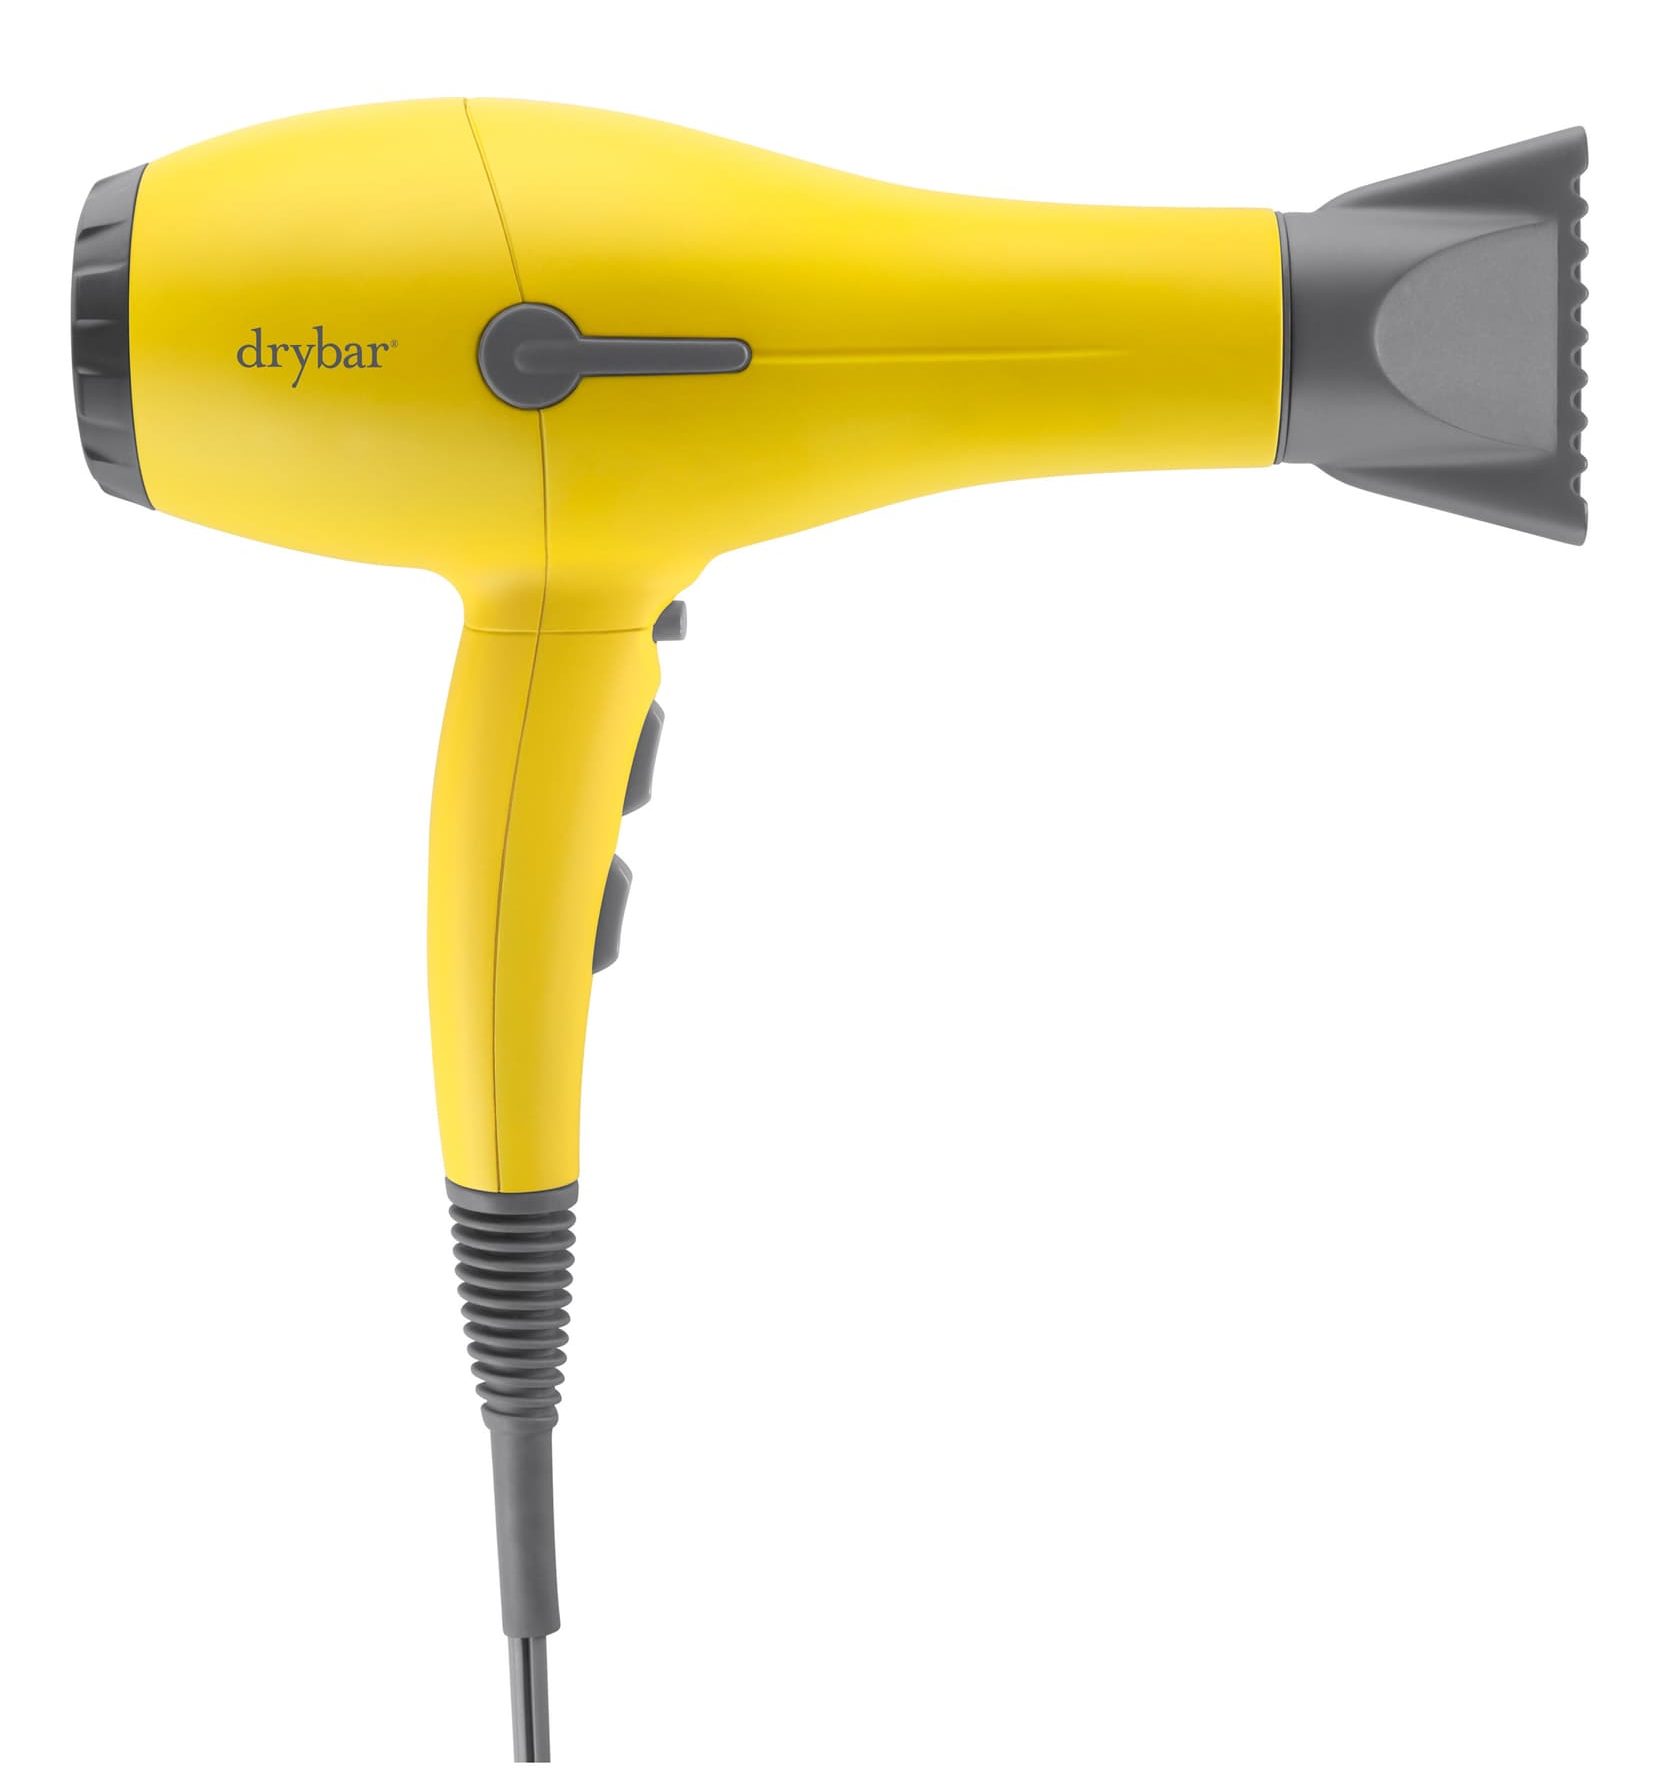 Best Gifts For Her 2023: Dry Bar Buttercup Yellow Hair Dryer for Wife 2023